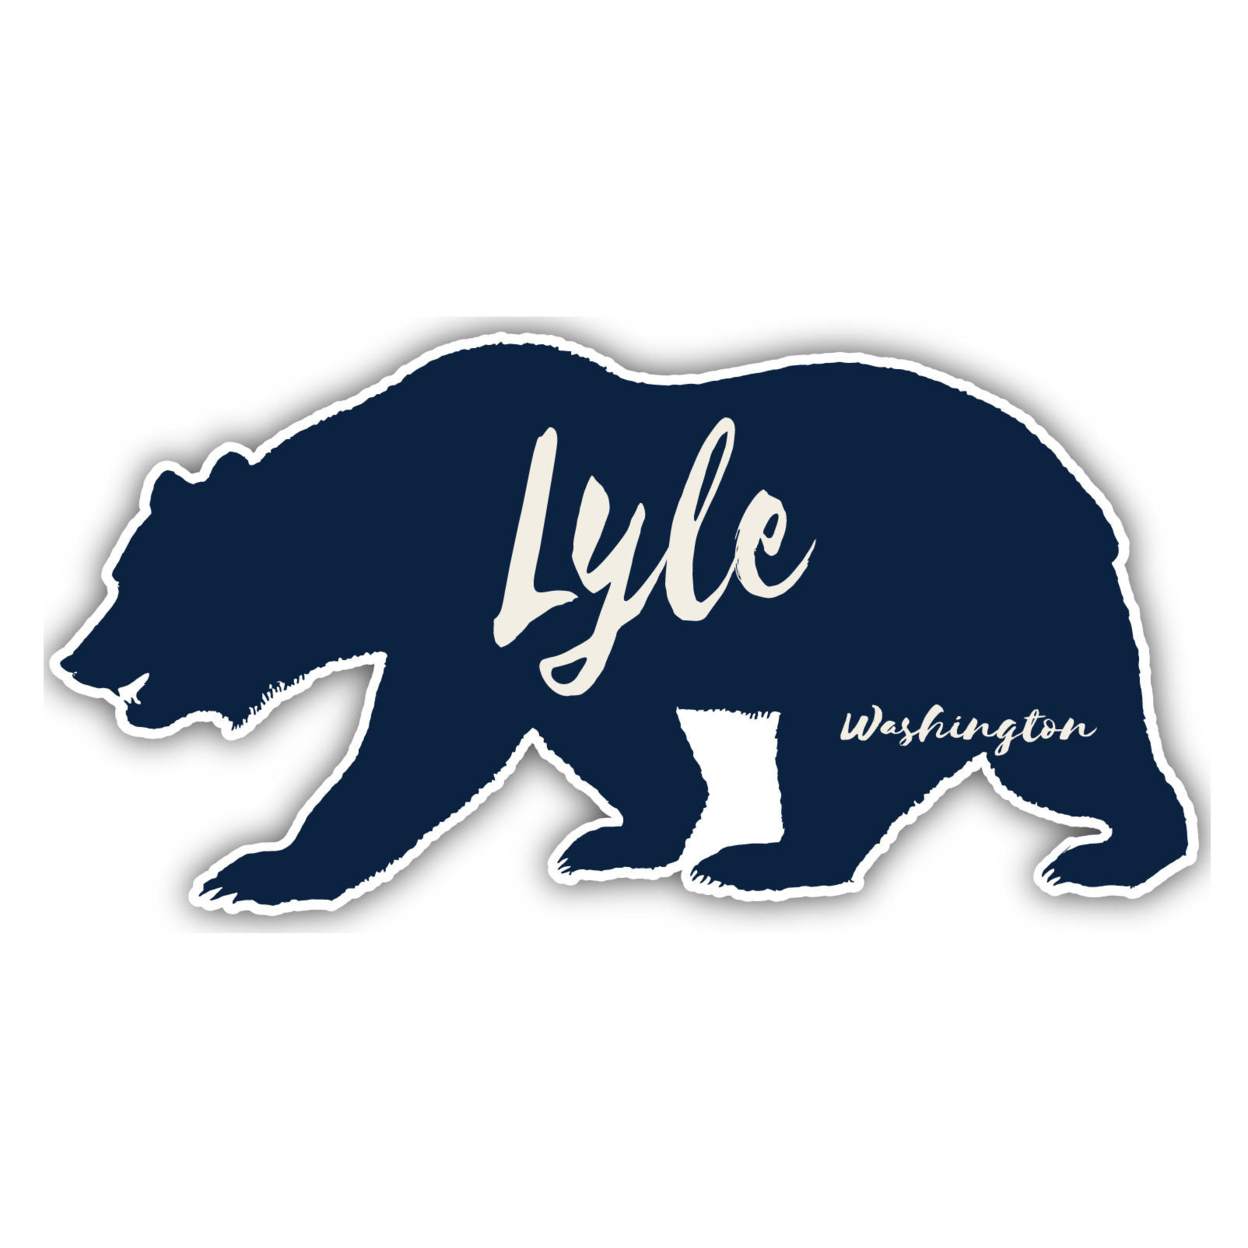 Lyle Washington Souvenir Decorative Stickers (Choose Theme And Size) - 4-Inch, Great Outdoors